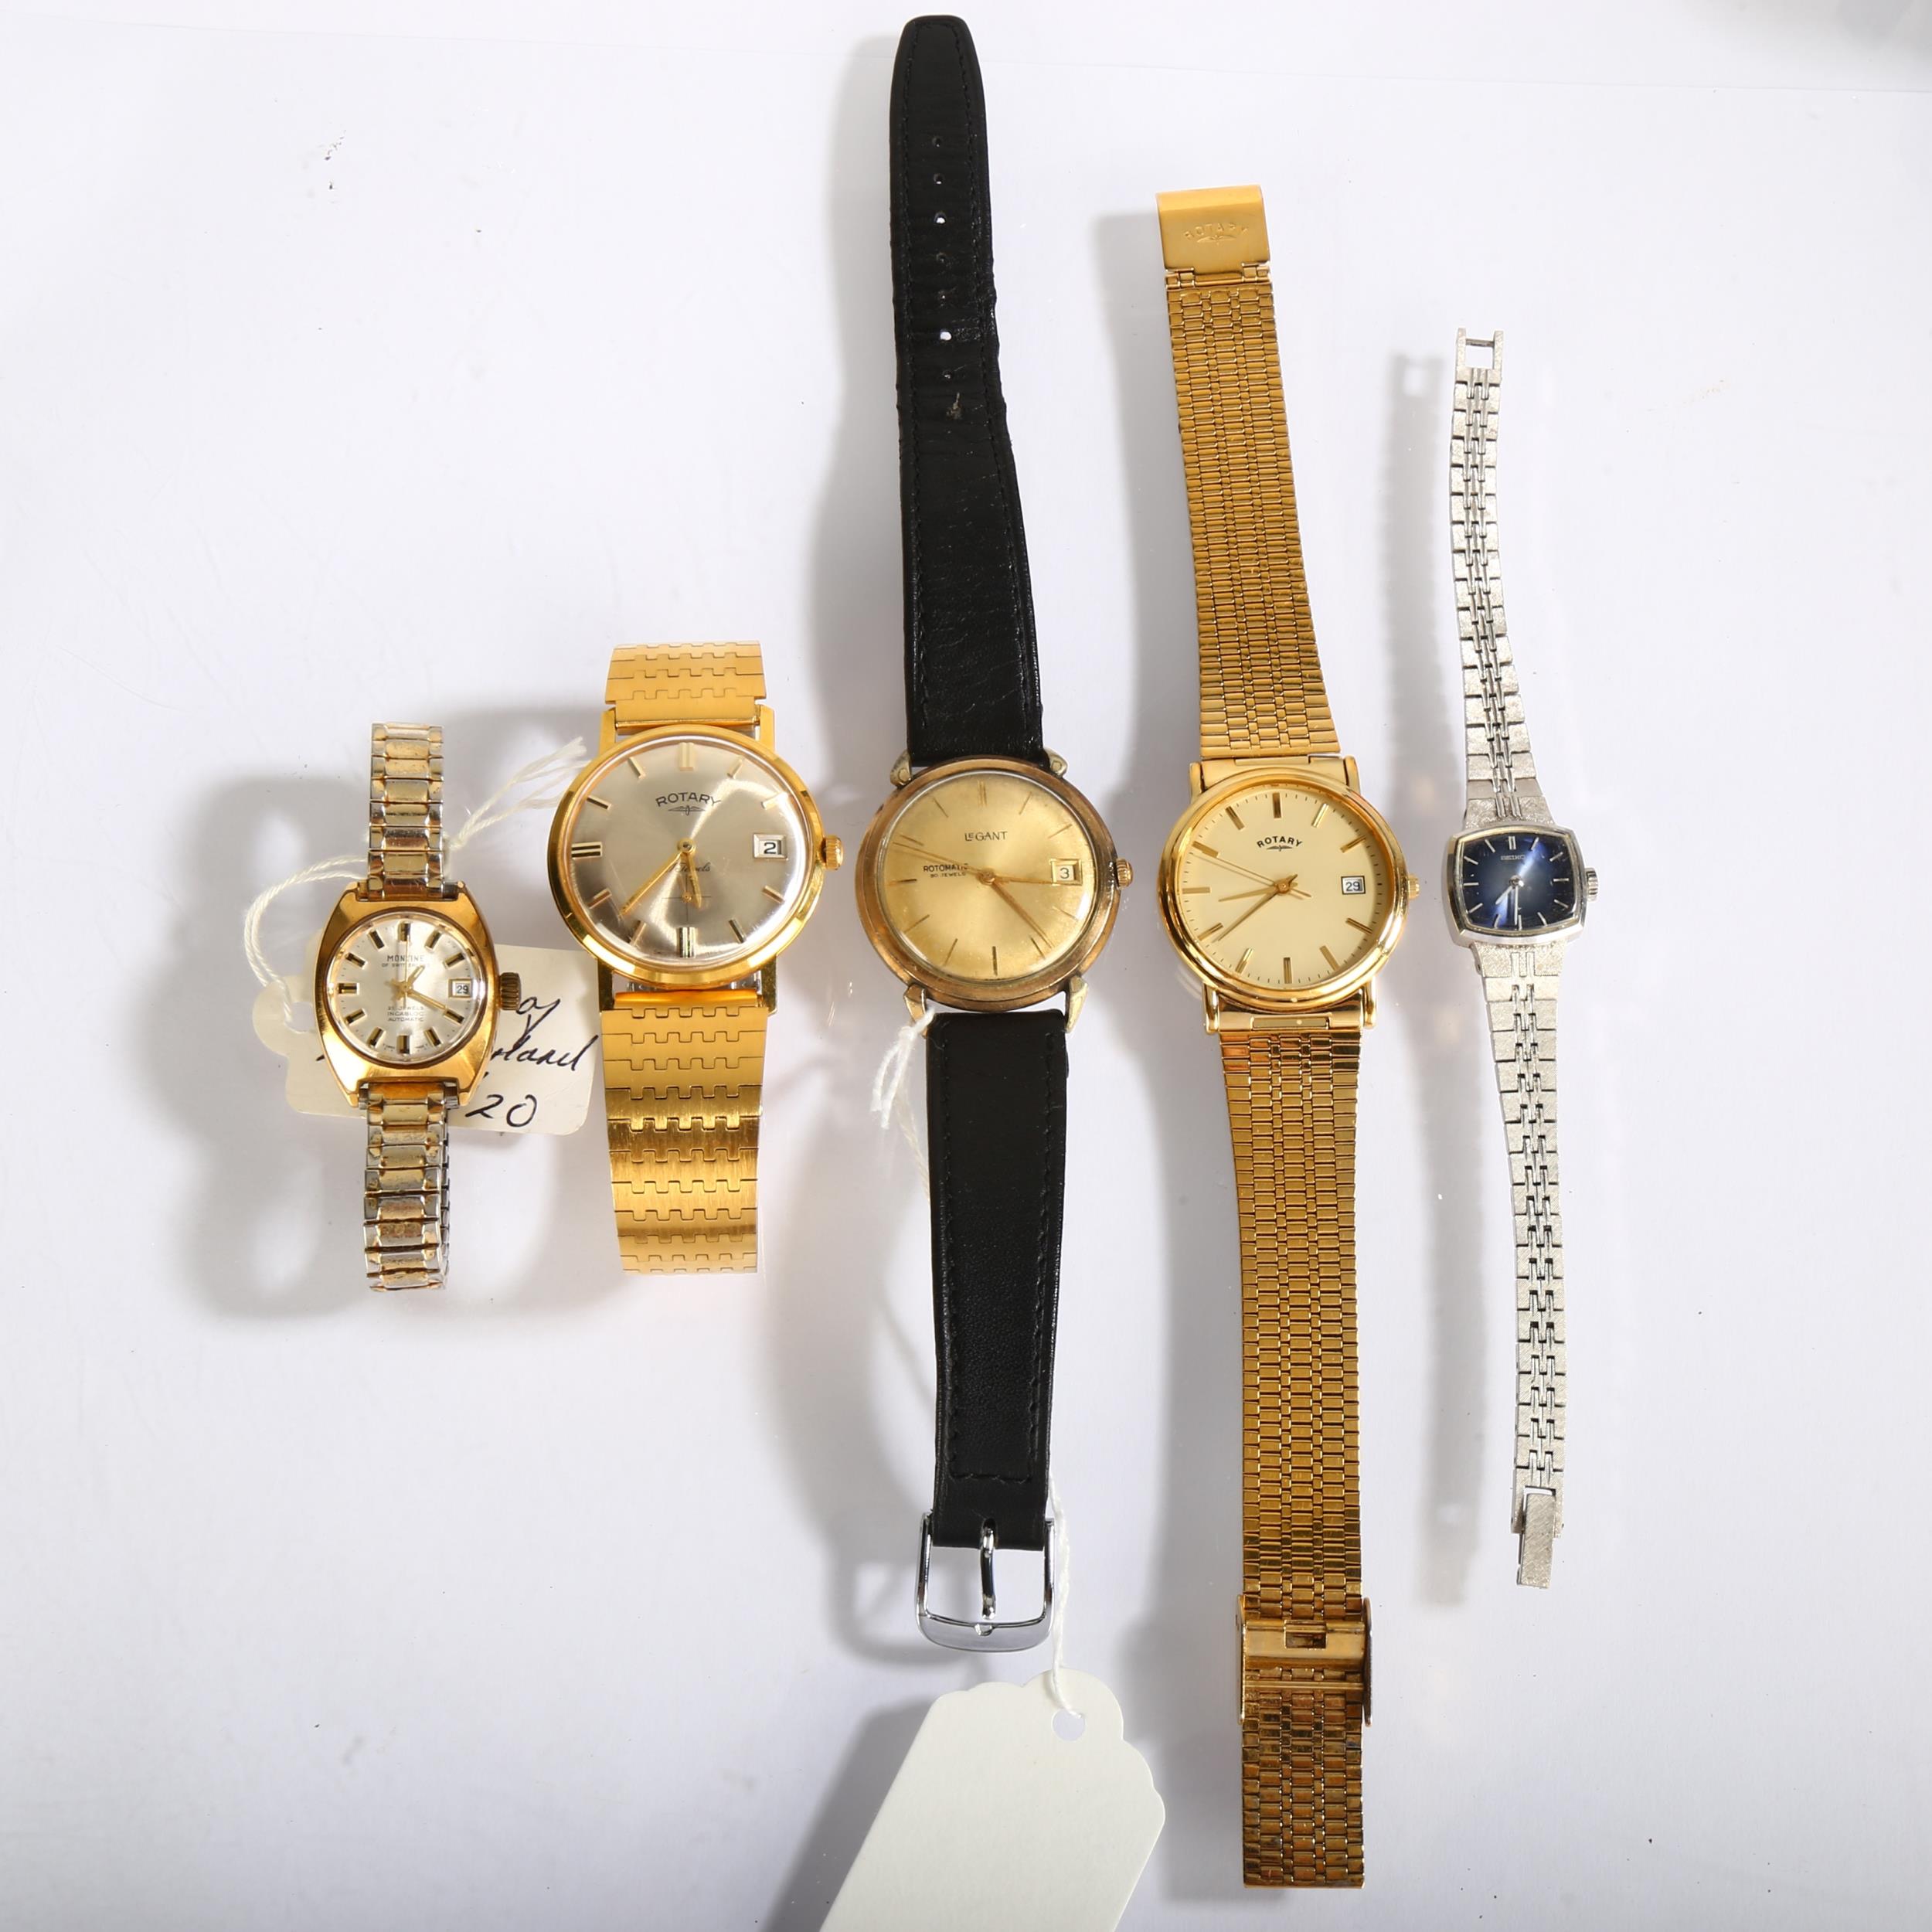 Various wristwatches, including Legant, Rotary etc (5) Lot sold as seen unless specific item(s) - Image 2 of 5